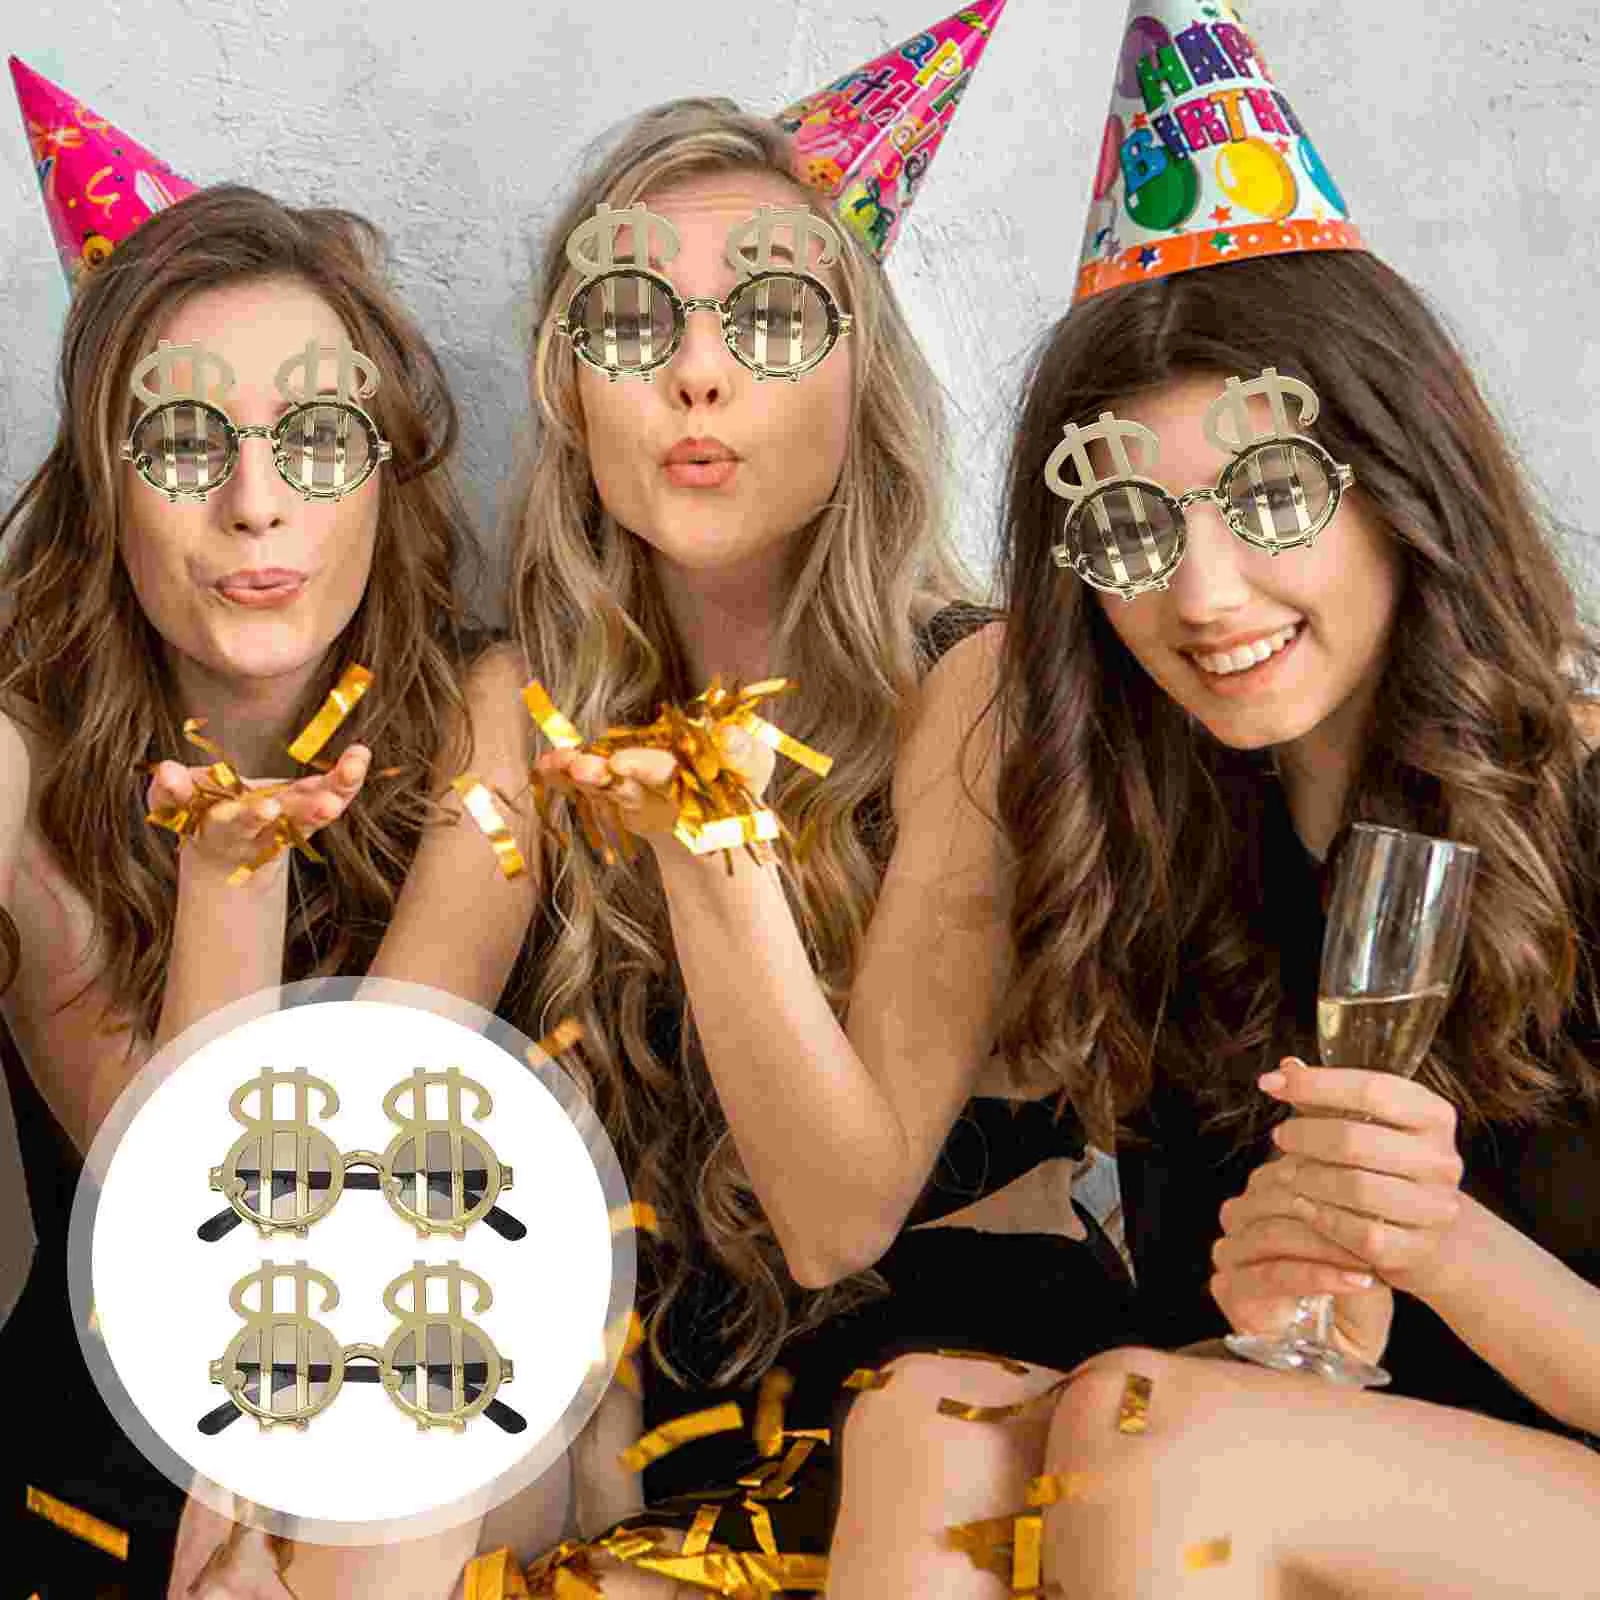 

Glasses Party Dollar Sunglasses Sign Money Eyeglasses Gold Funny Props Photo Costume Shaped Rapper Cosplay Carnival Hop Dj